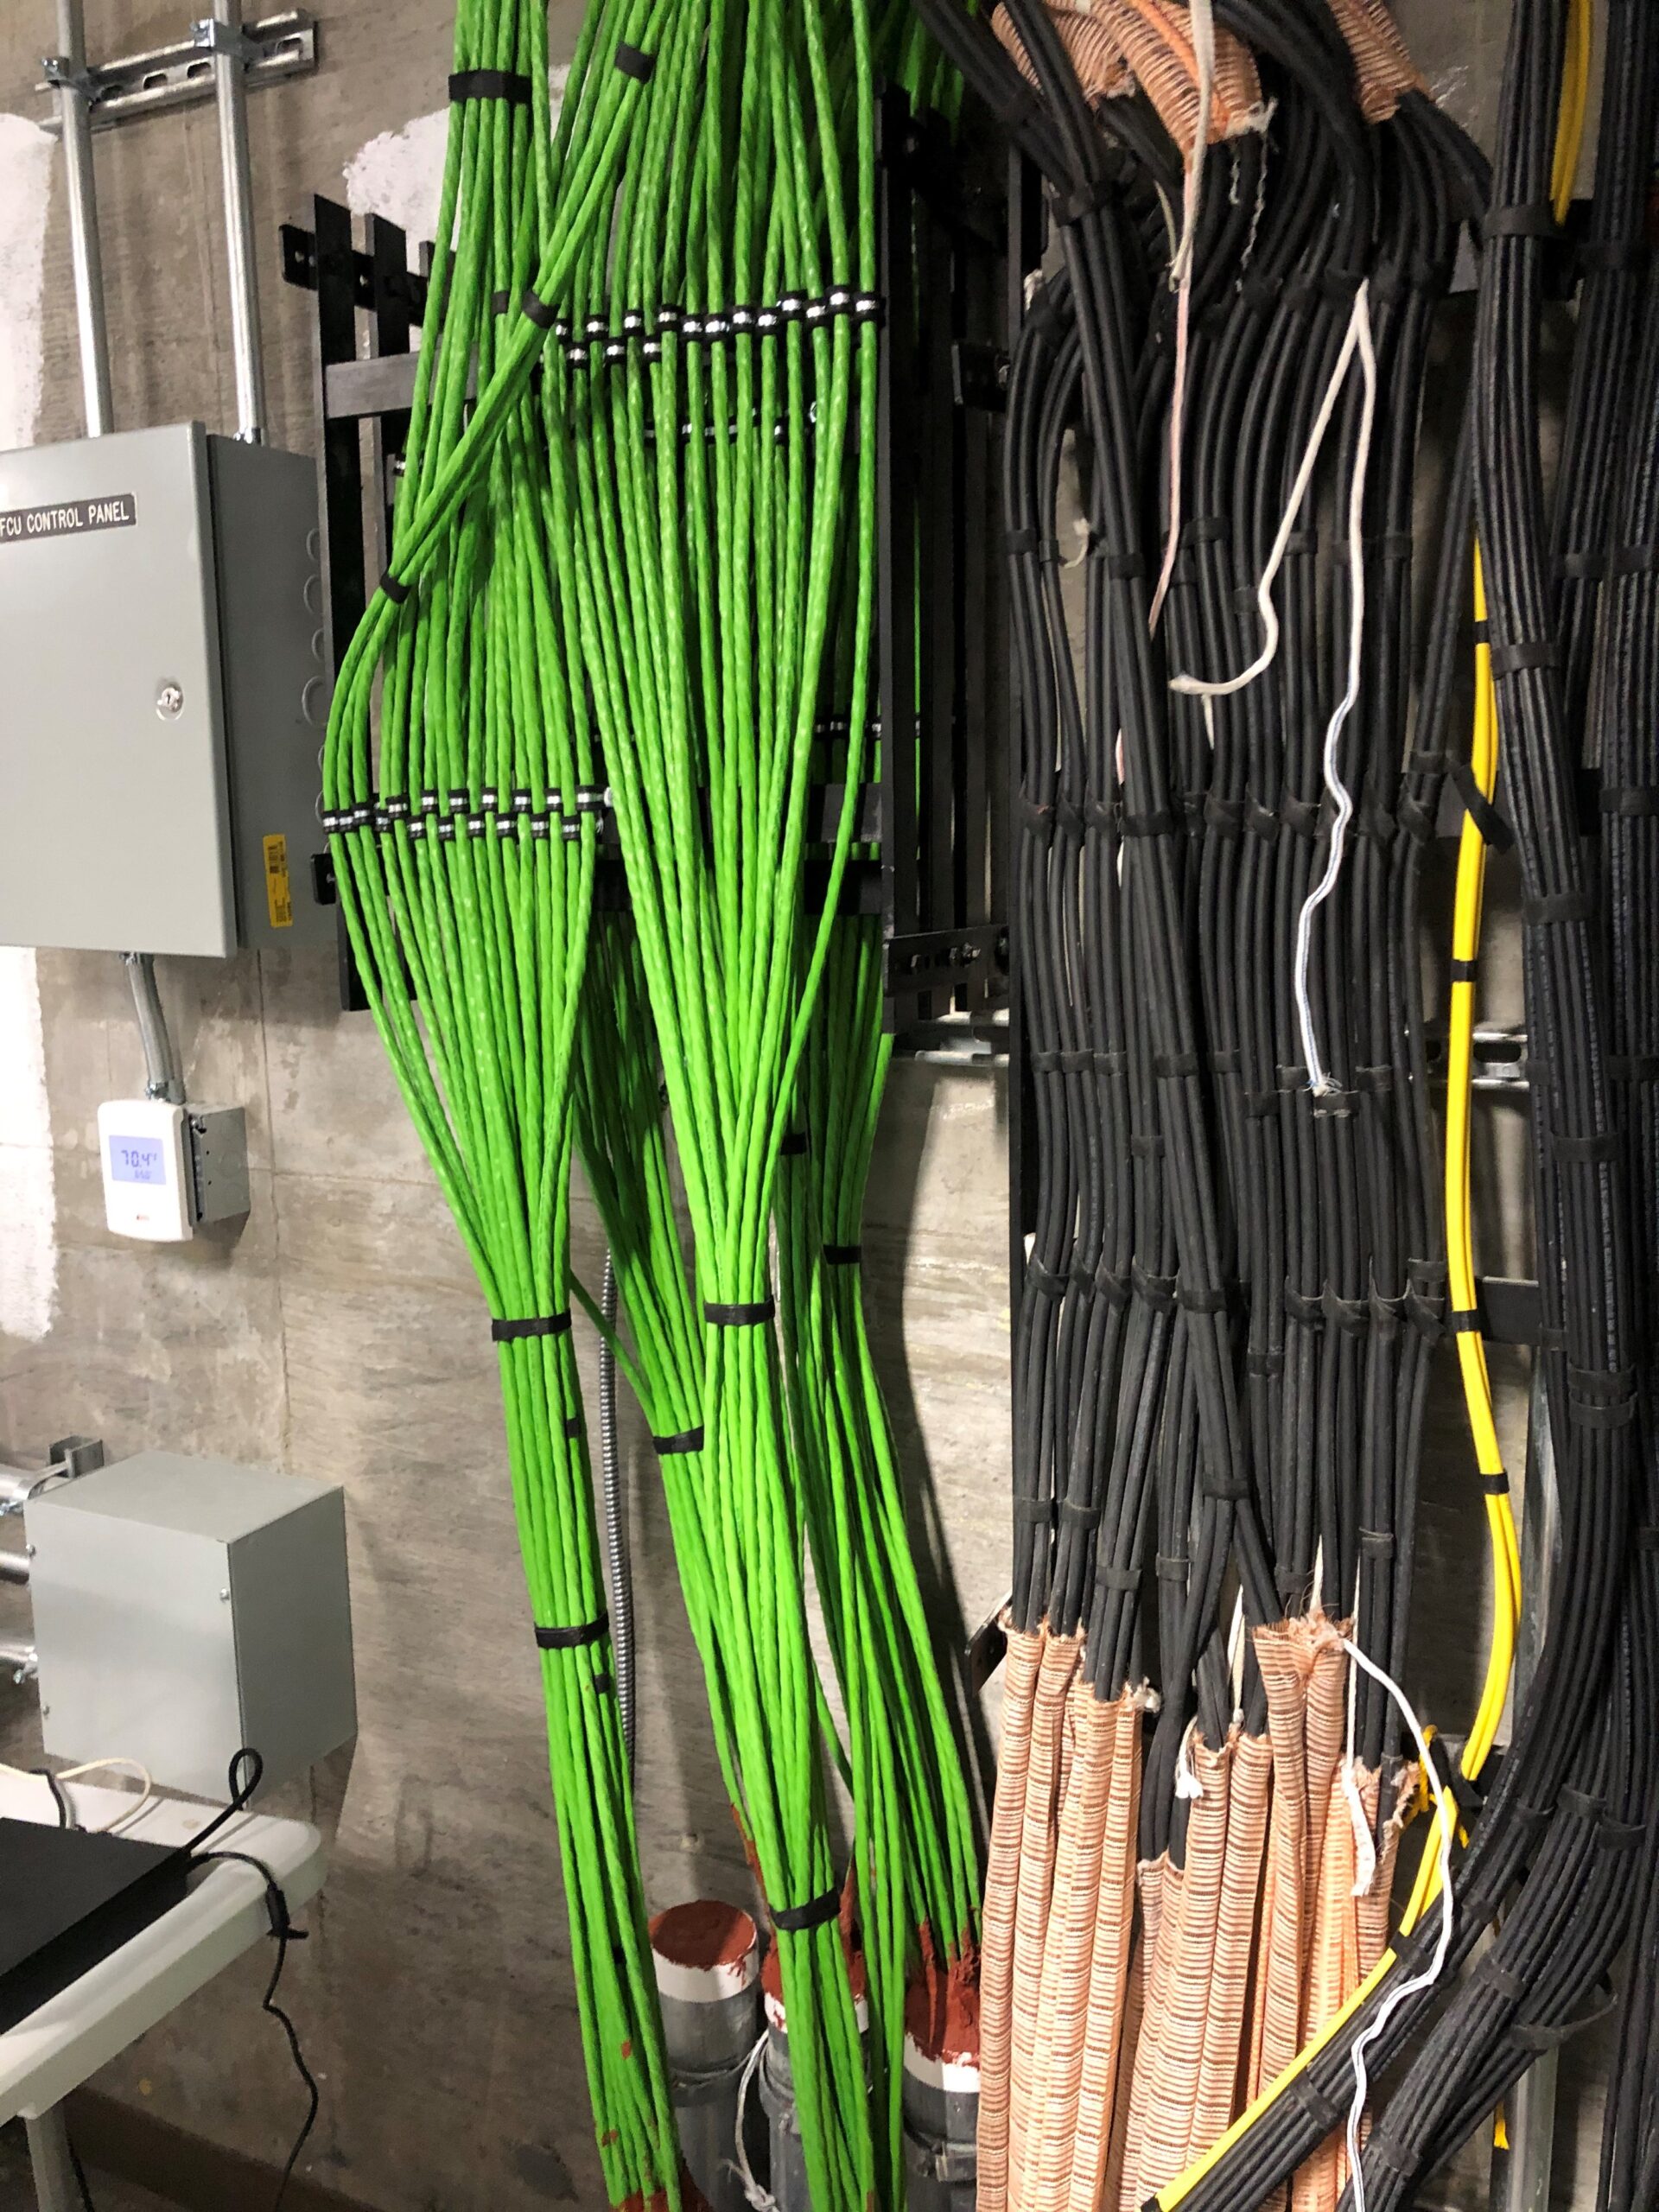 Vertically running green digital electricity cables